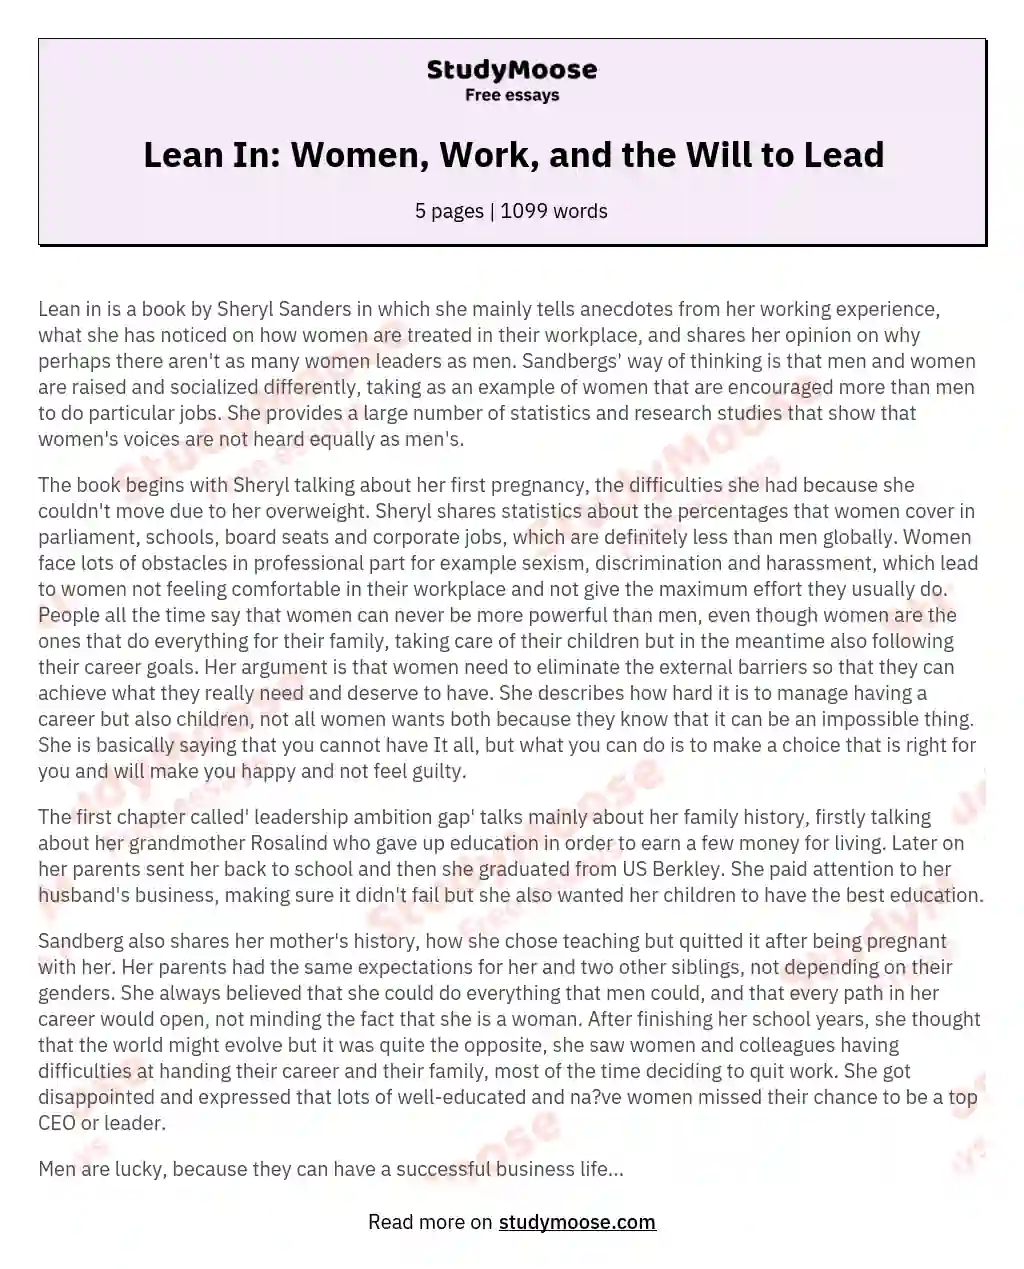 Lean In: Women, Work, and the Will to Lead essay